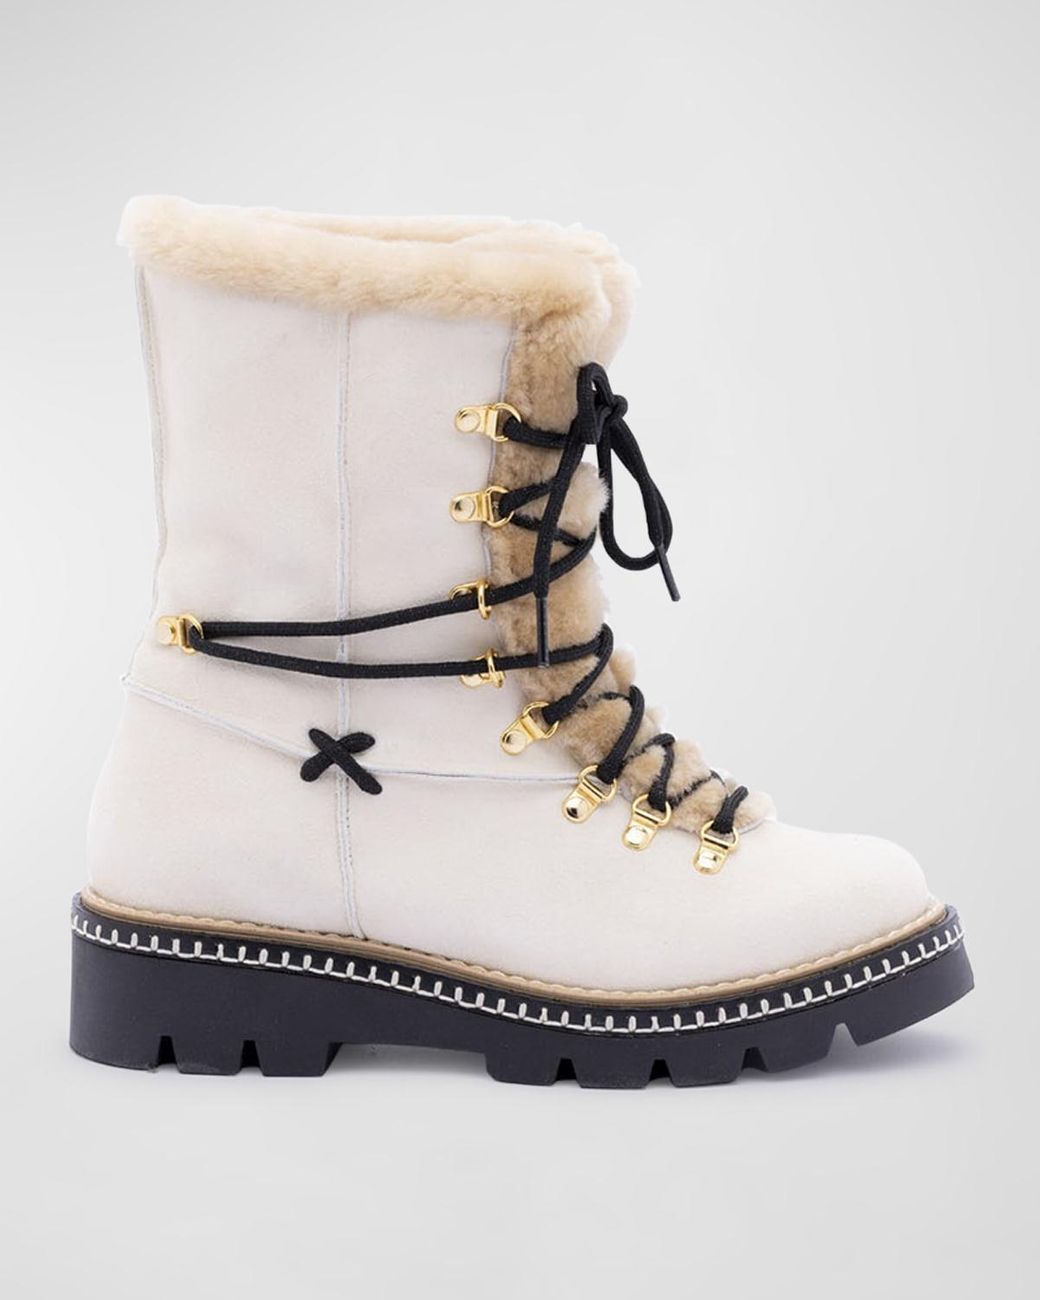 MONTELLIANA 1965 Shearling-lined Leather Hiking Boots in White | Lyst